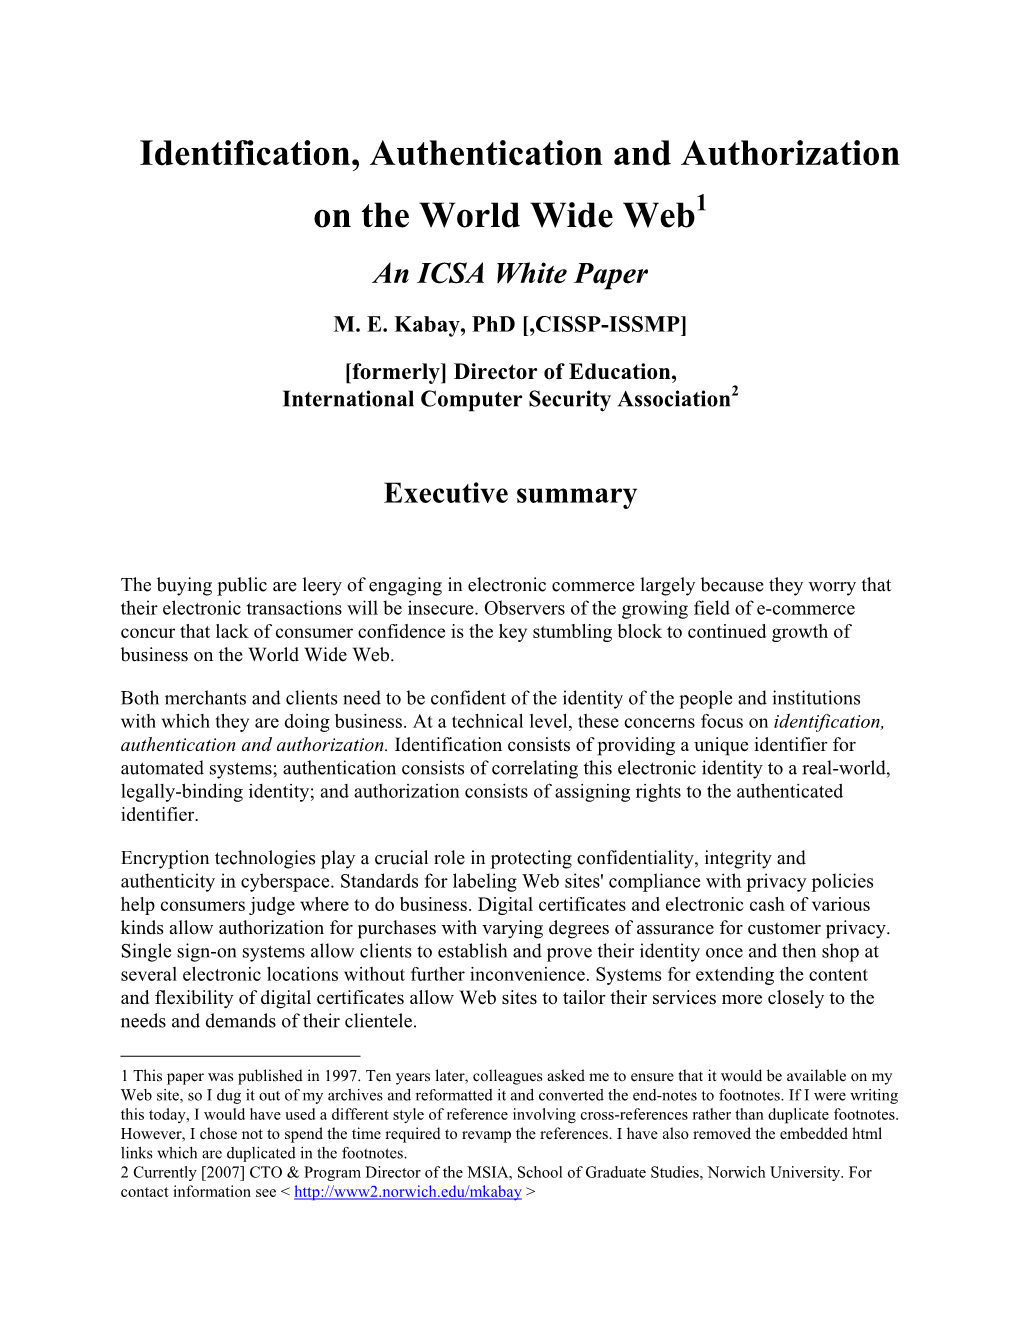 Identification, Authentication and Authorization on the World Wide Web1